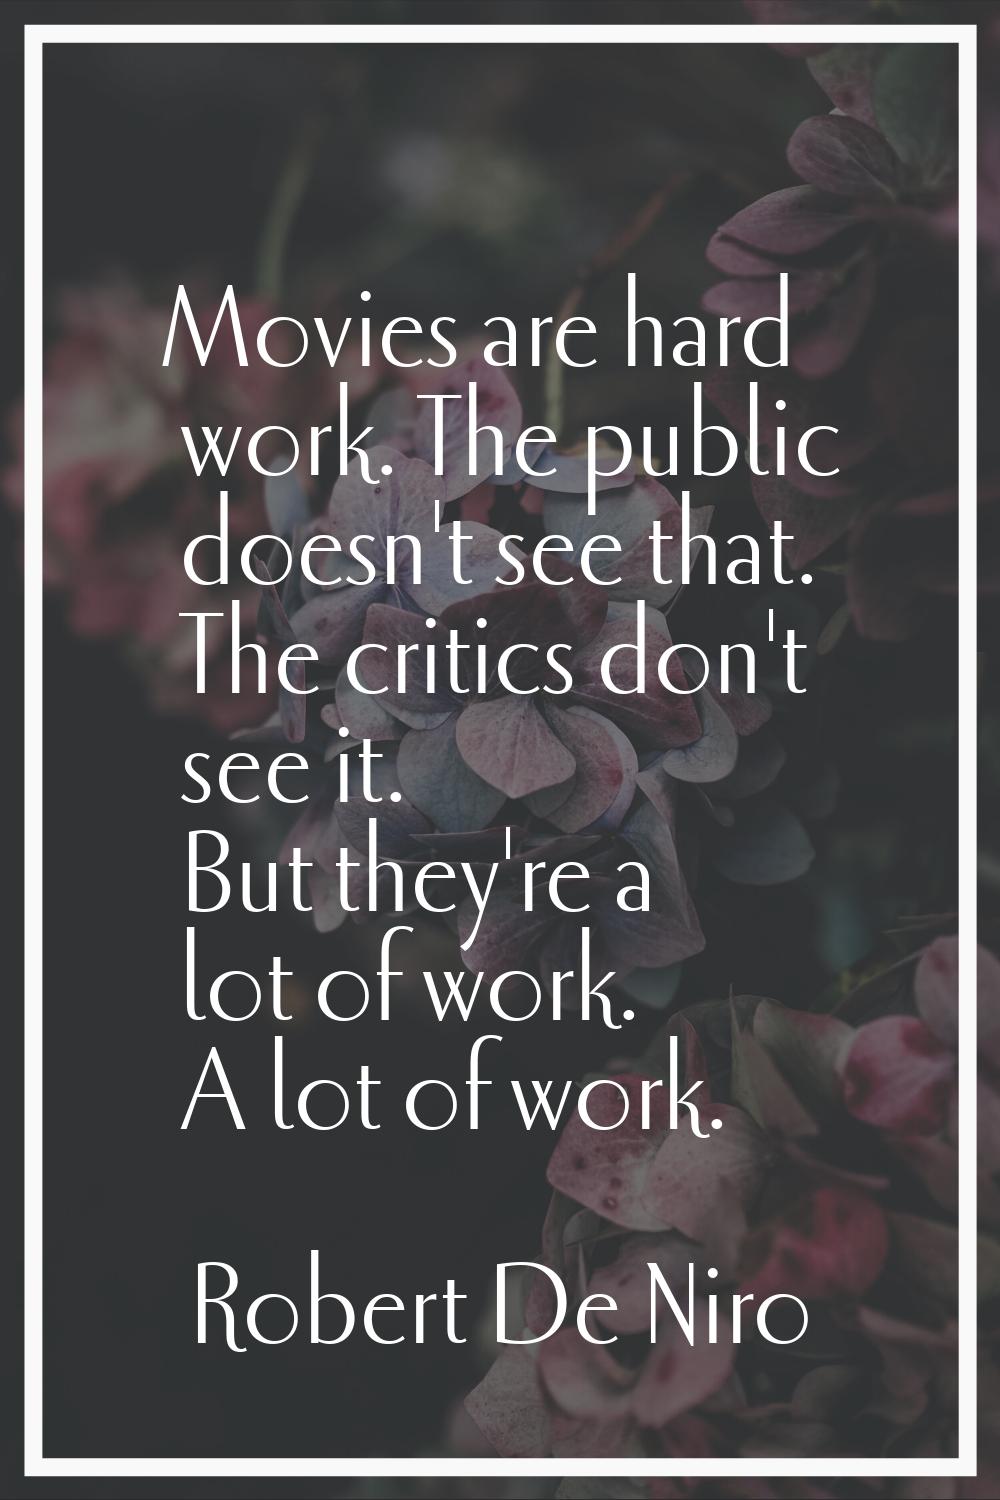 Movies are hard work. The public doesn't see that. The critics don't see it. But they're a lot of w